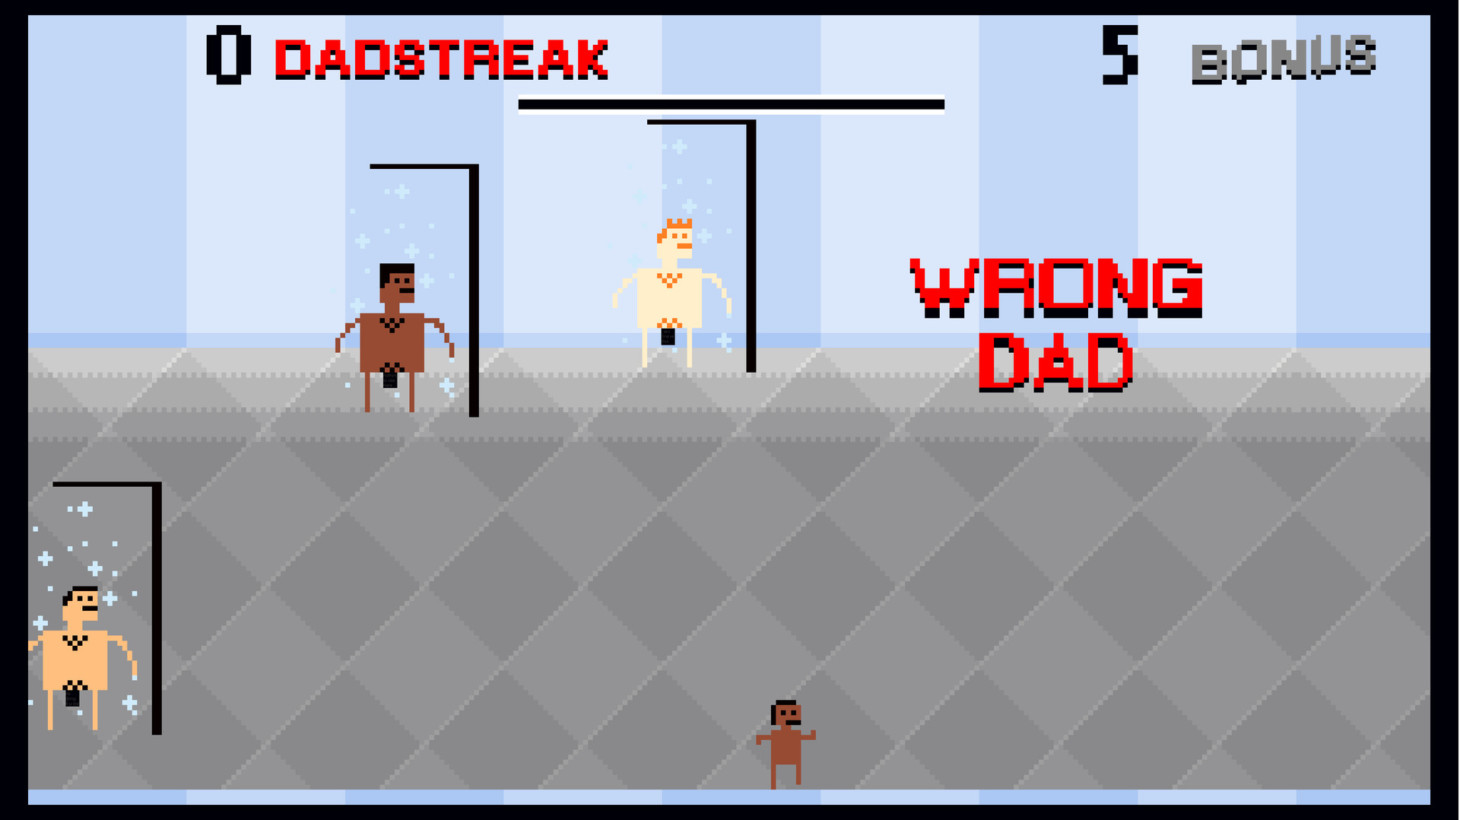 shower-with-your-dad-simulator-game-2.jpg